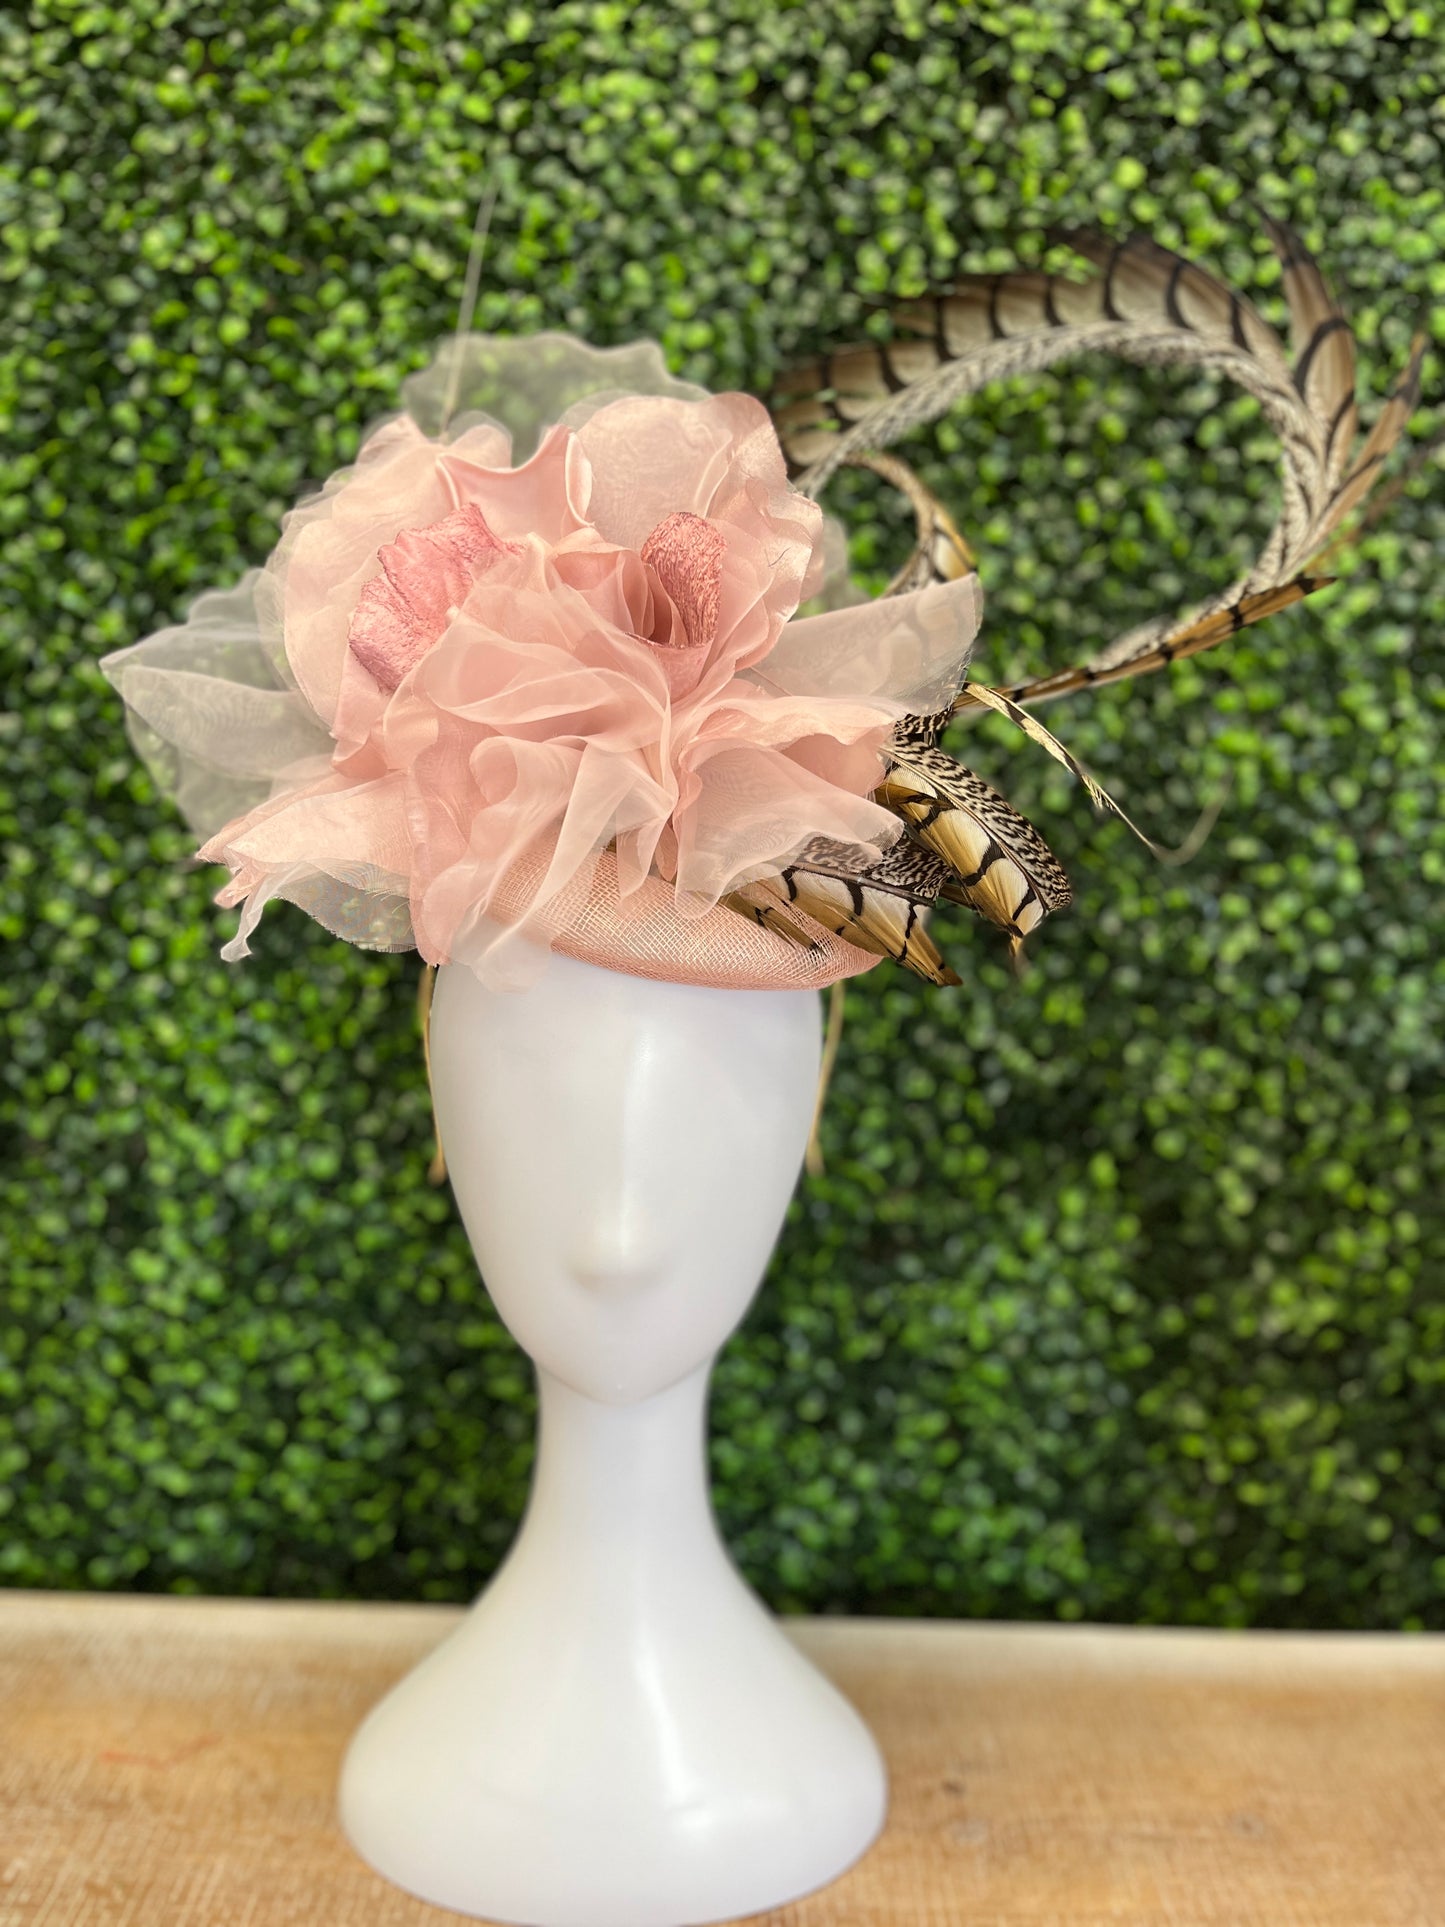 Handmade Blush with Natural Pheasant Feathers Fascinator Hat